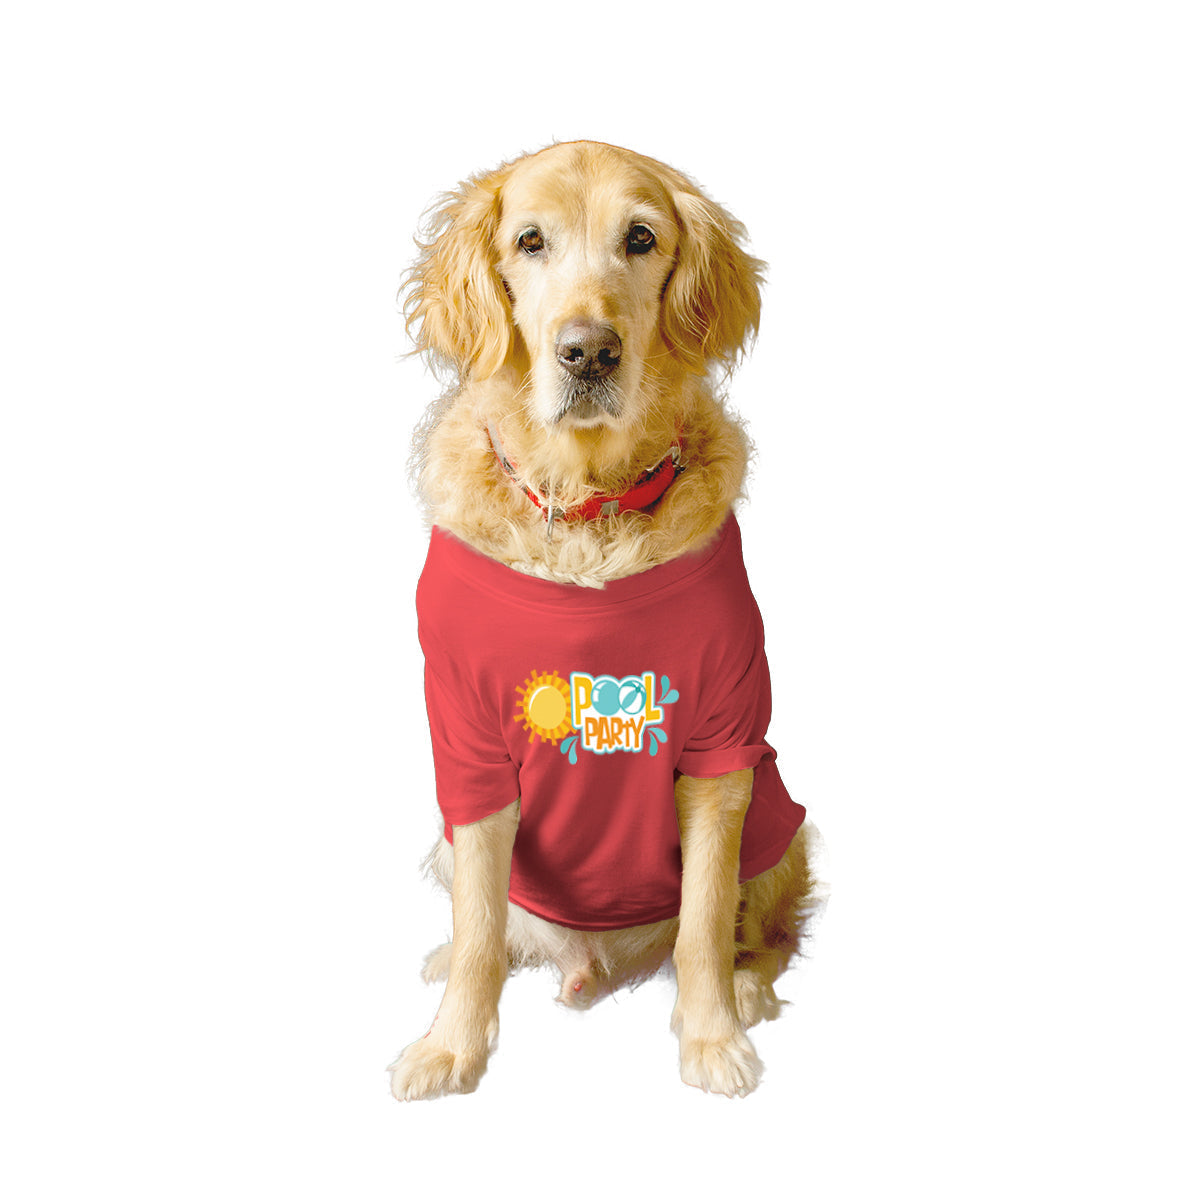 Ruse XX-Small (Chihuahuas, Papillons) / Poppy Red Ruse Basic Crew Neck 'Pool Party' Printed Half Sleeves Dog Tee8